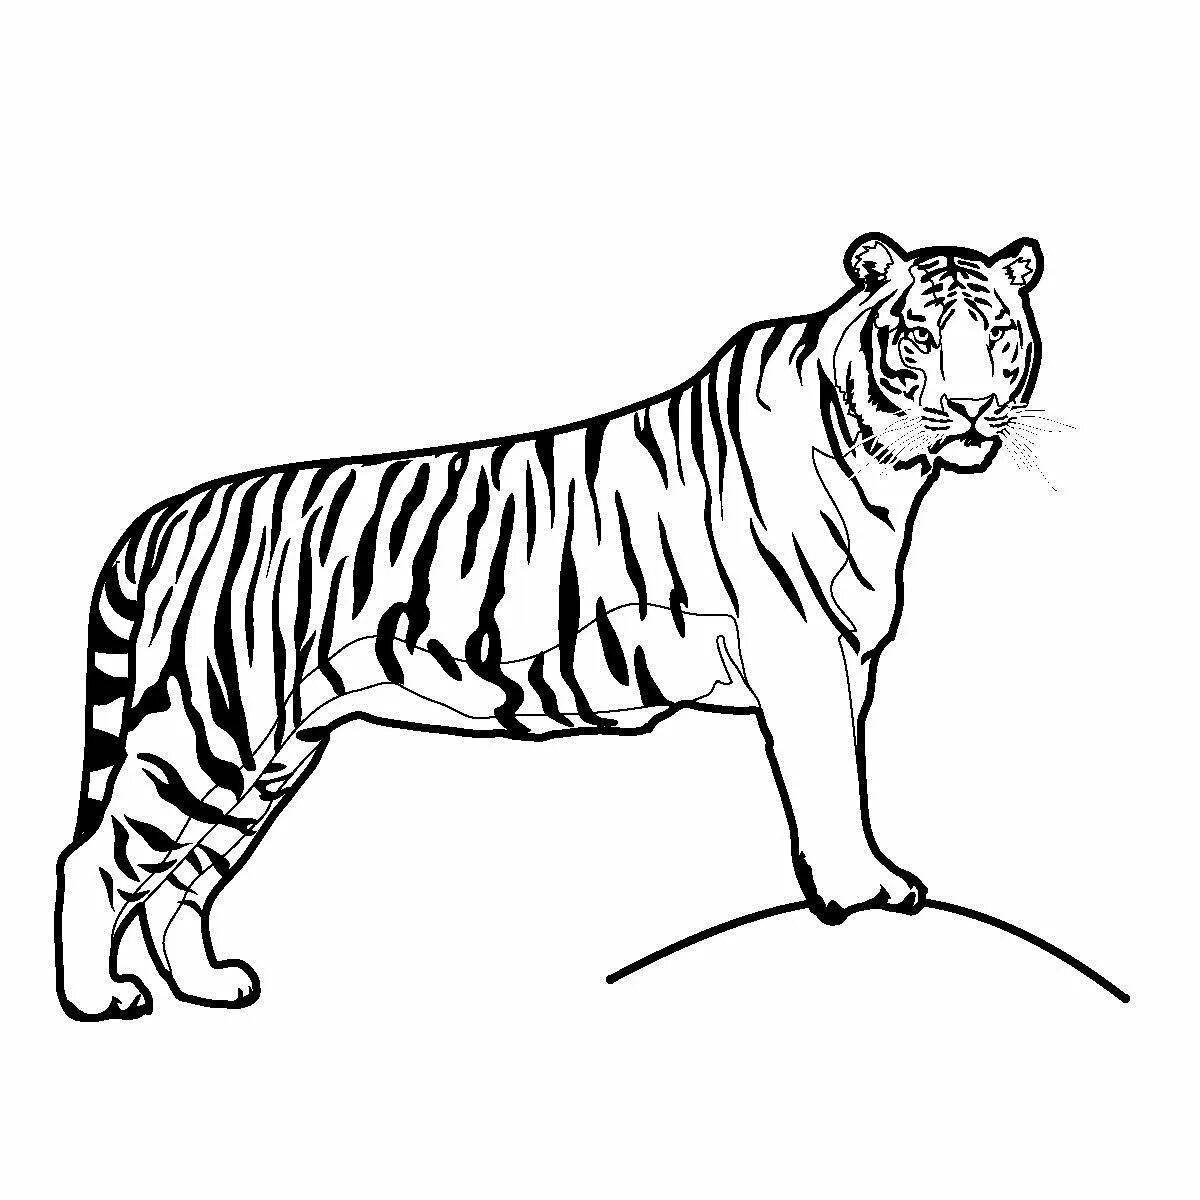 Coloring book fabulous family of tigers